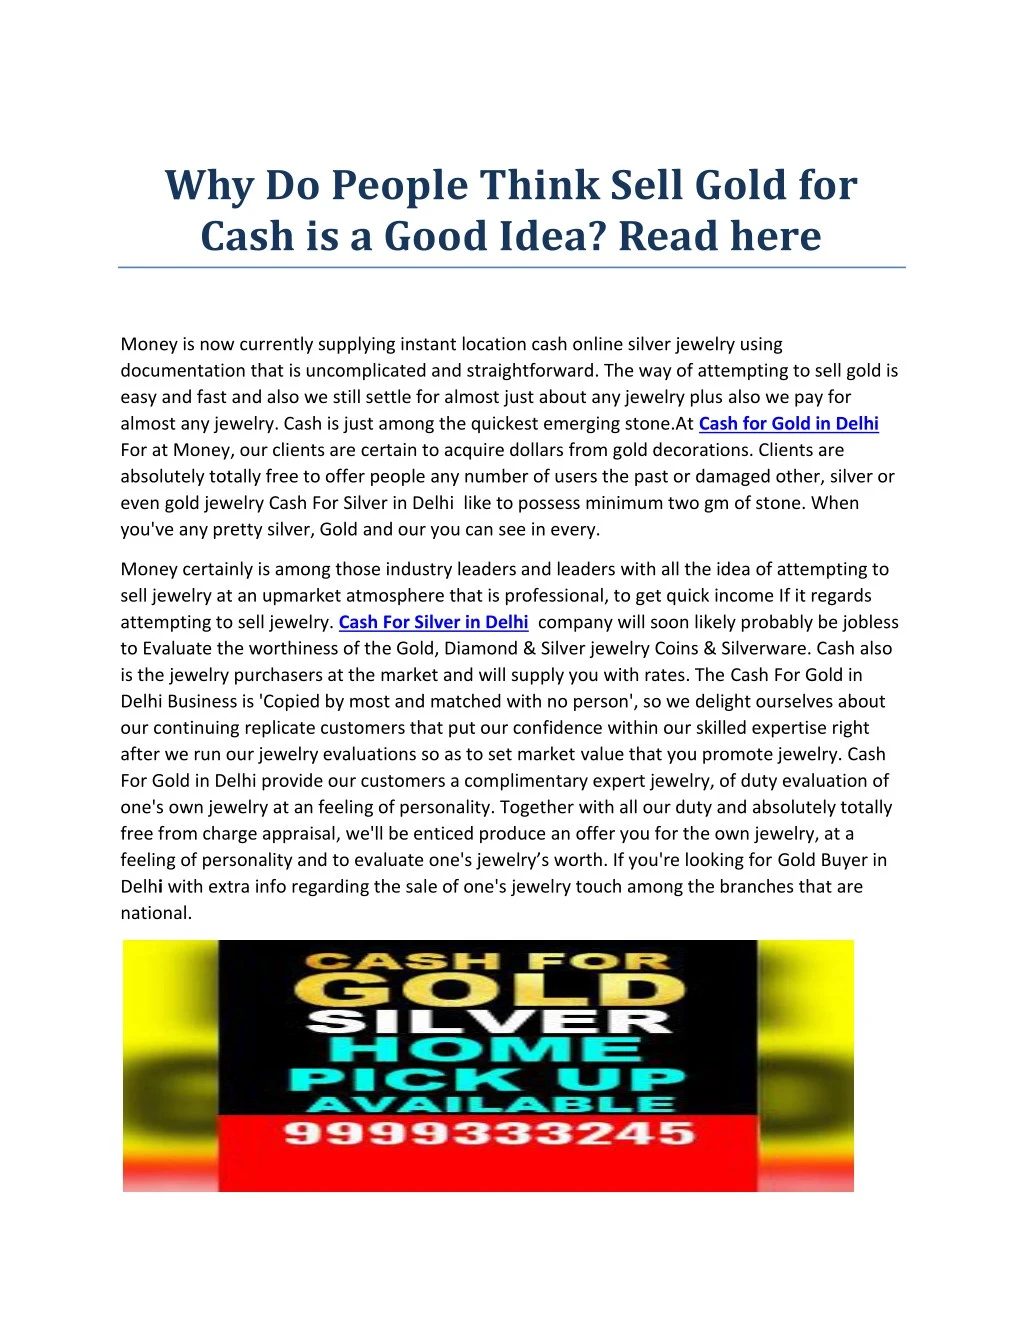 why do people think sell gold for cash is a good